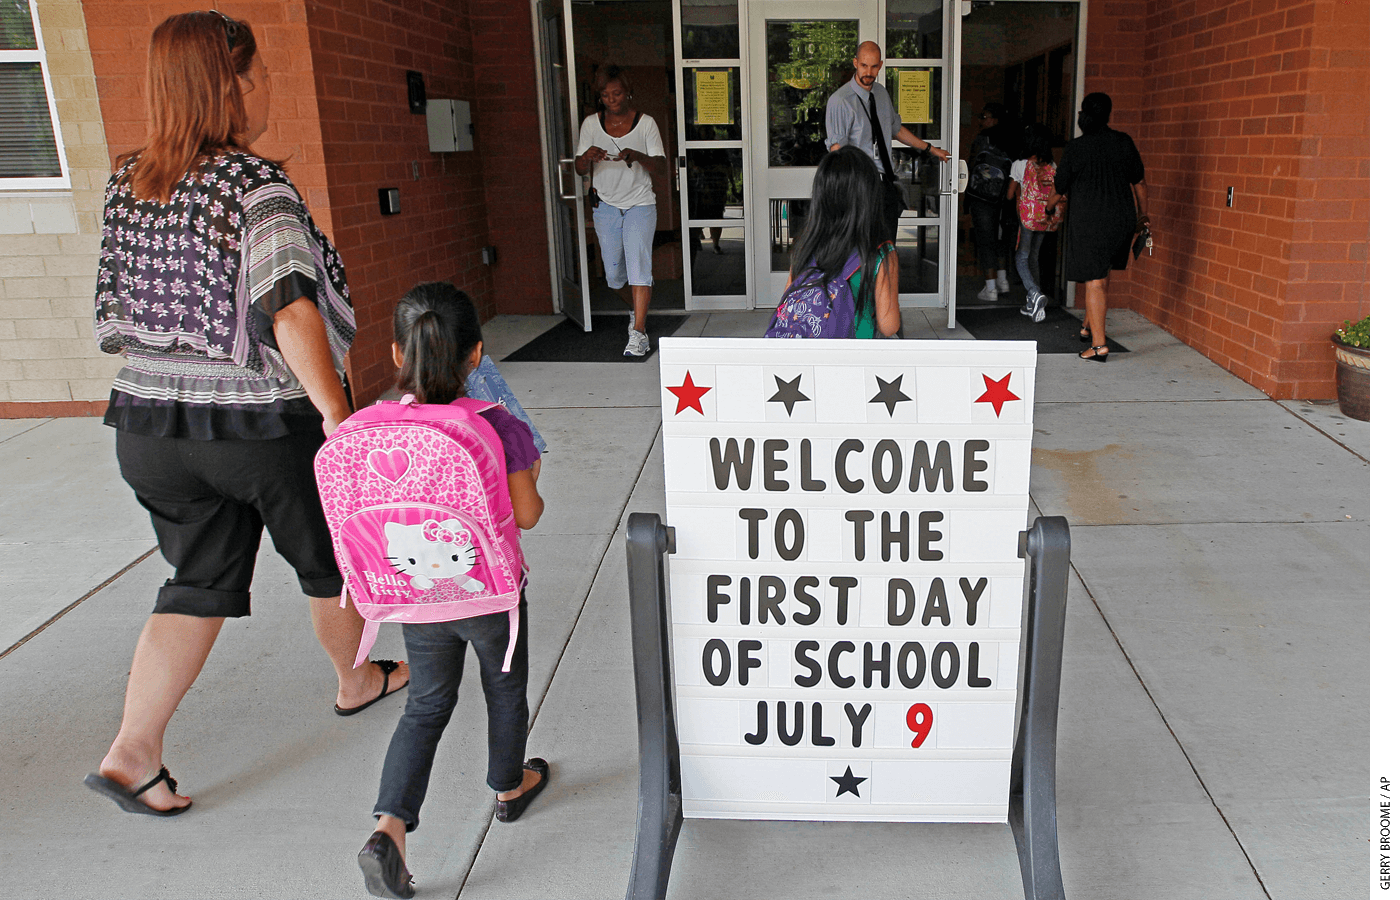 Students start a new school year at Barwell Road Elementary School in Raleigh, N.C.